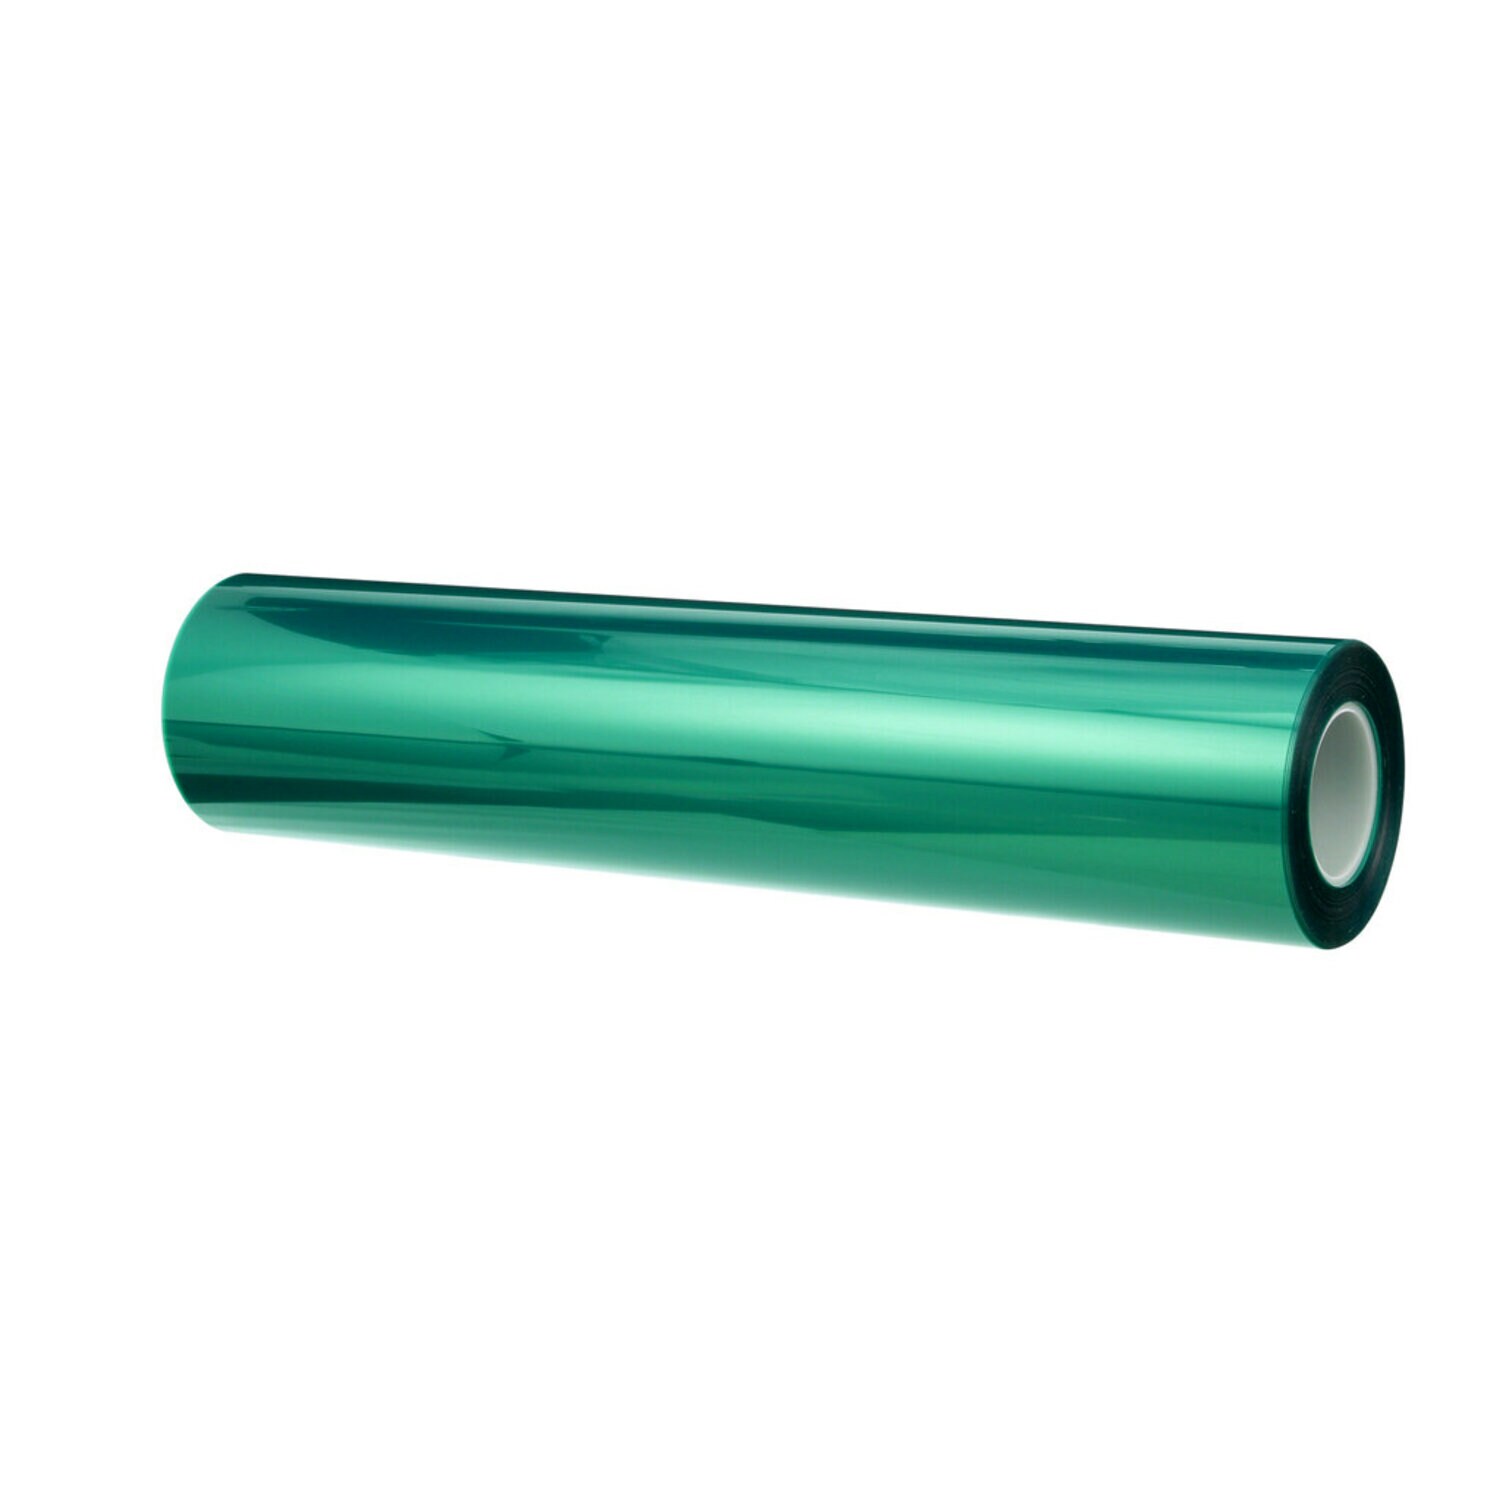 7000042808 - 3M Polyester Tape 8992, Green, 50.4 in x 72 yd, 3.2 mil, 1 roll per
case